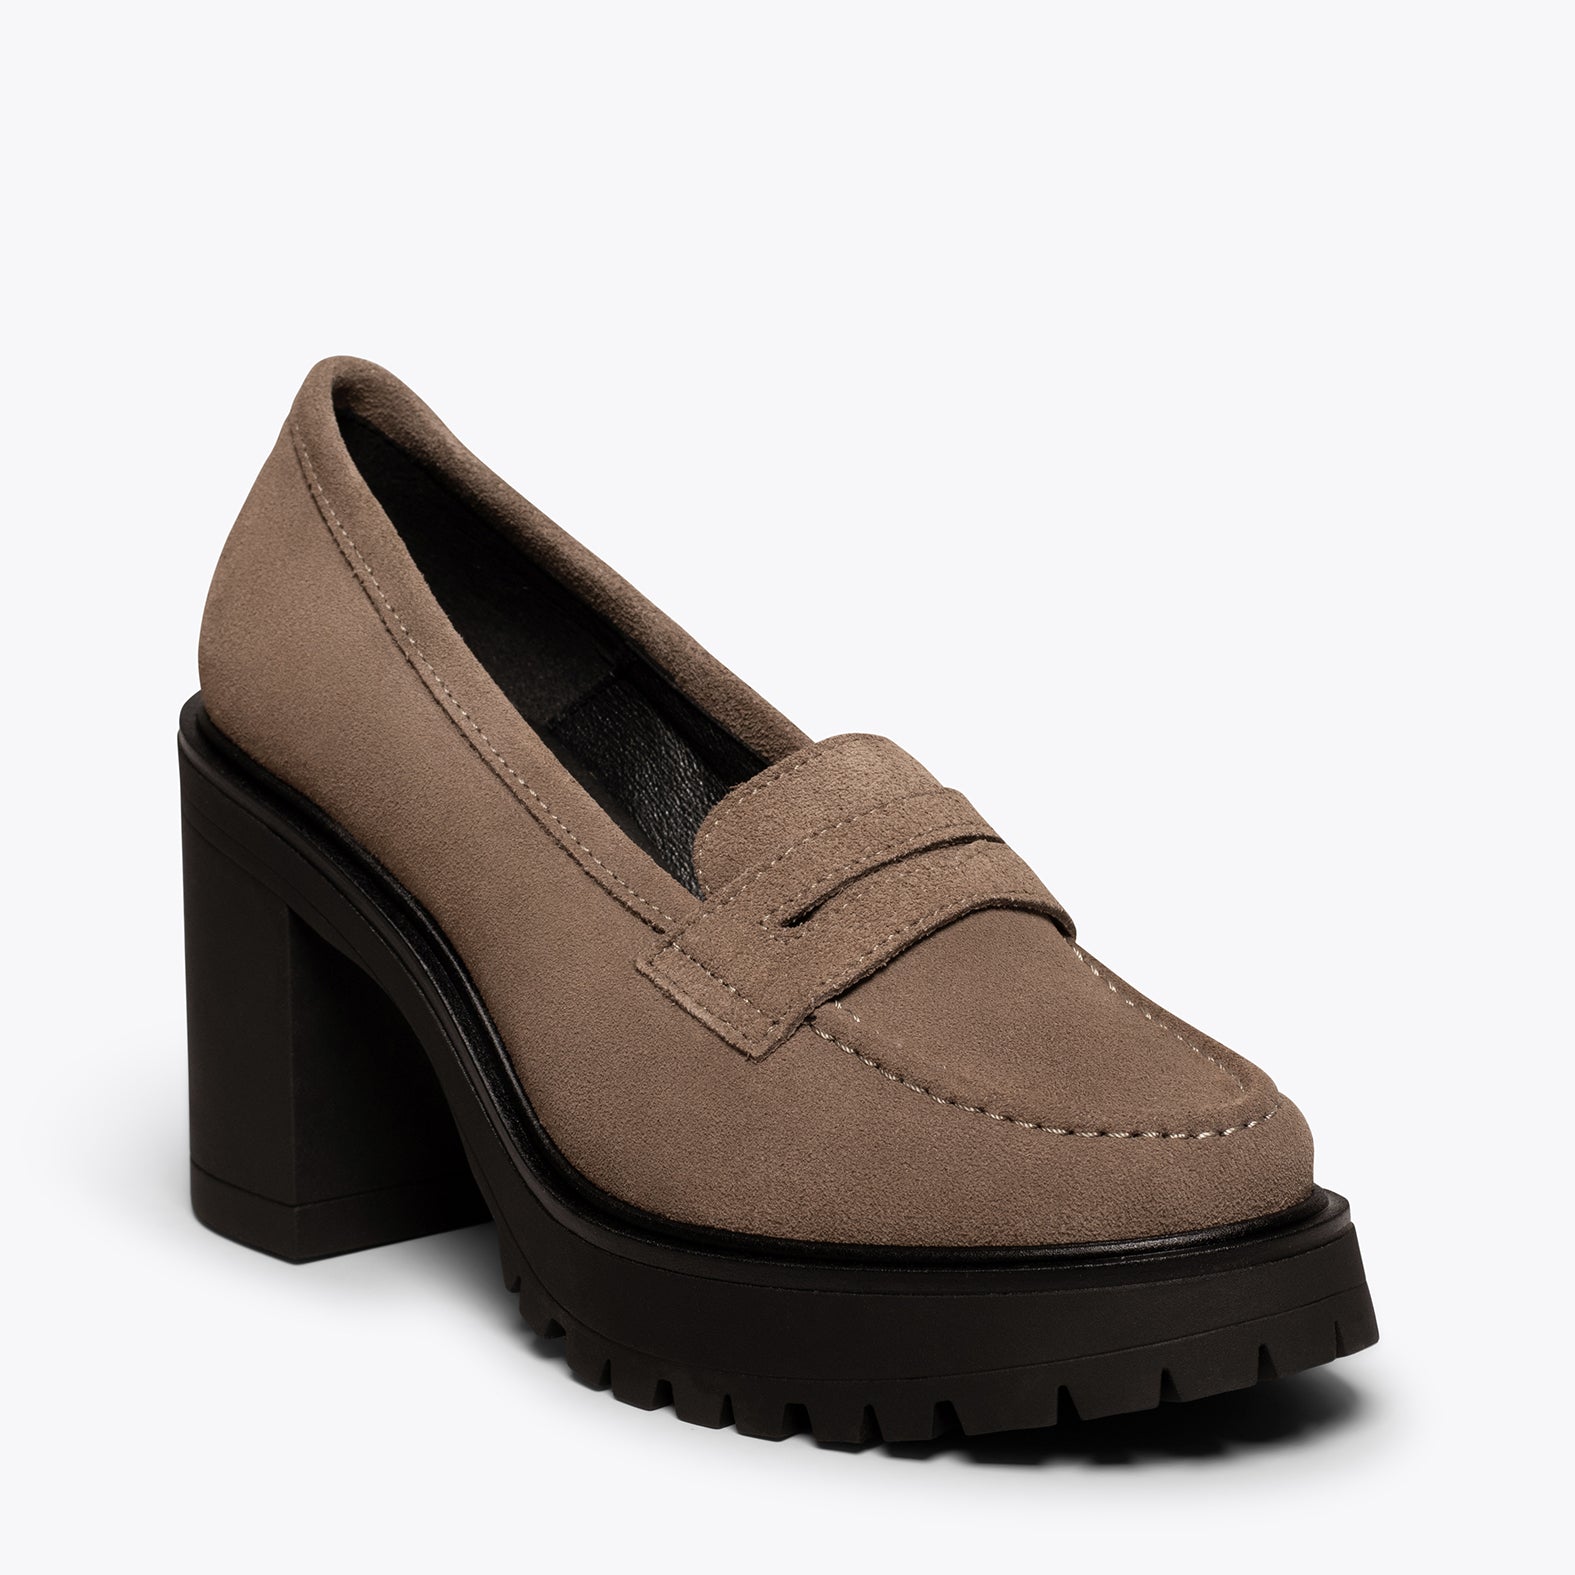 TRACK – TAUPE high heel moccasin with track sole